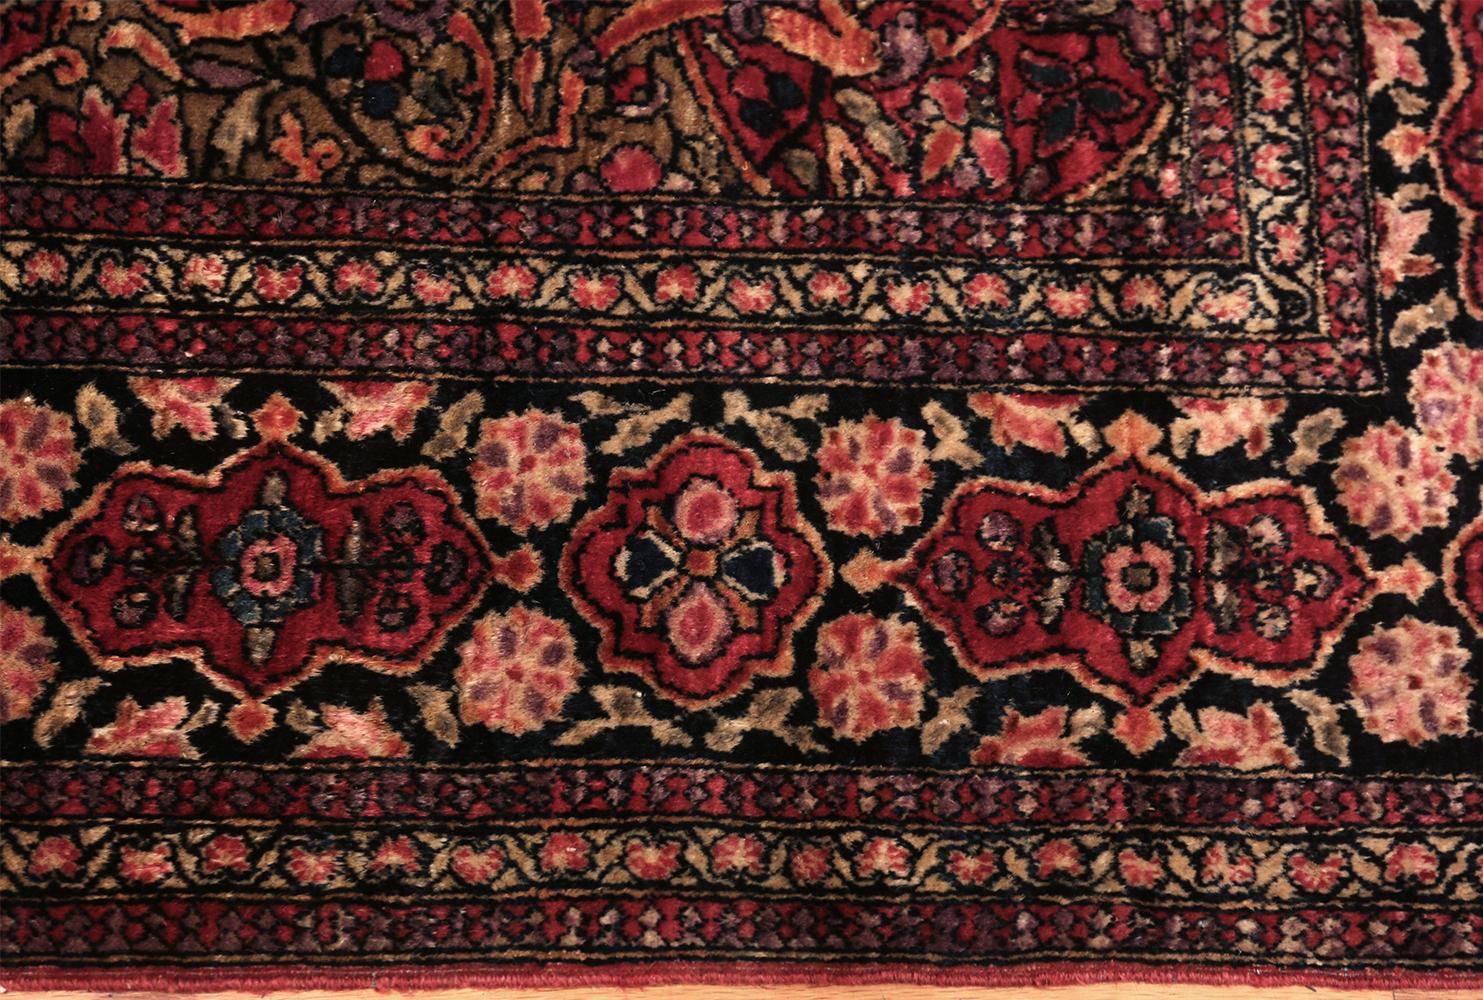 Beautiful antique Persian floral Isfahan rug, country of origin / rug type: Persian rug, date circa 1930 - size: 4 ft. 7 in x 6 ft. 7 in (1.4 m x 2.01 m). This magnificent Isfahan carpet from the 1930s has a regal feel. The colors are rich and